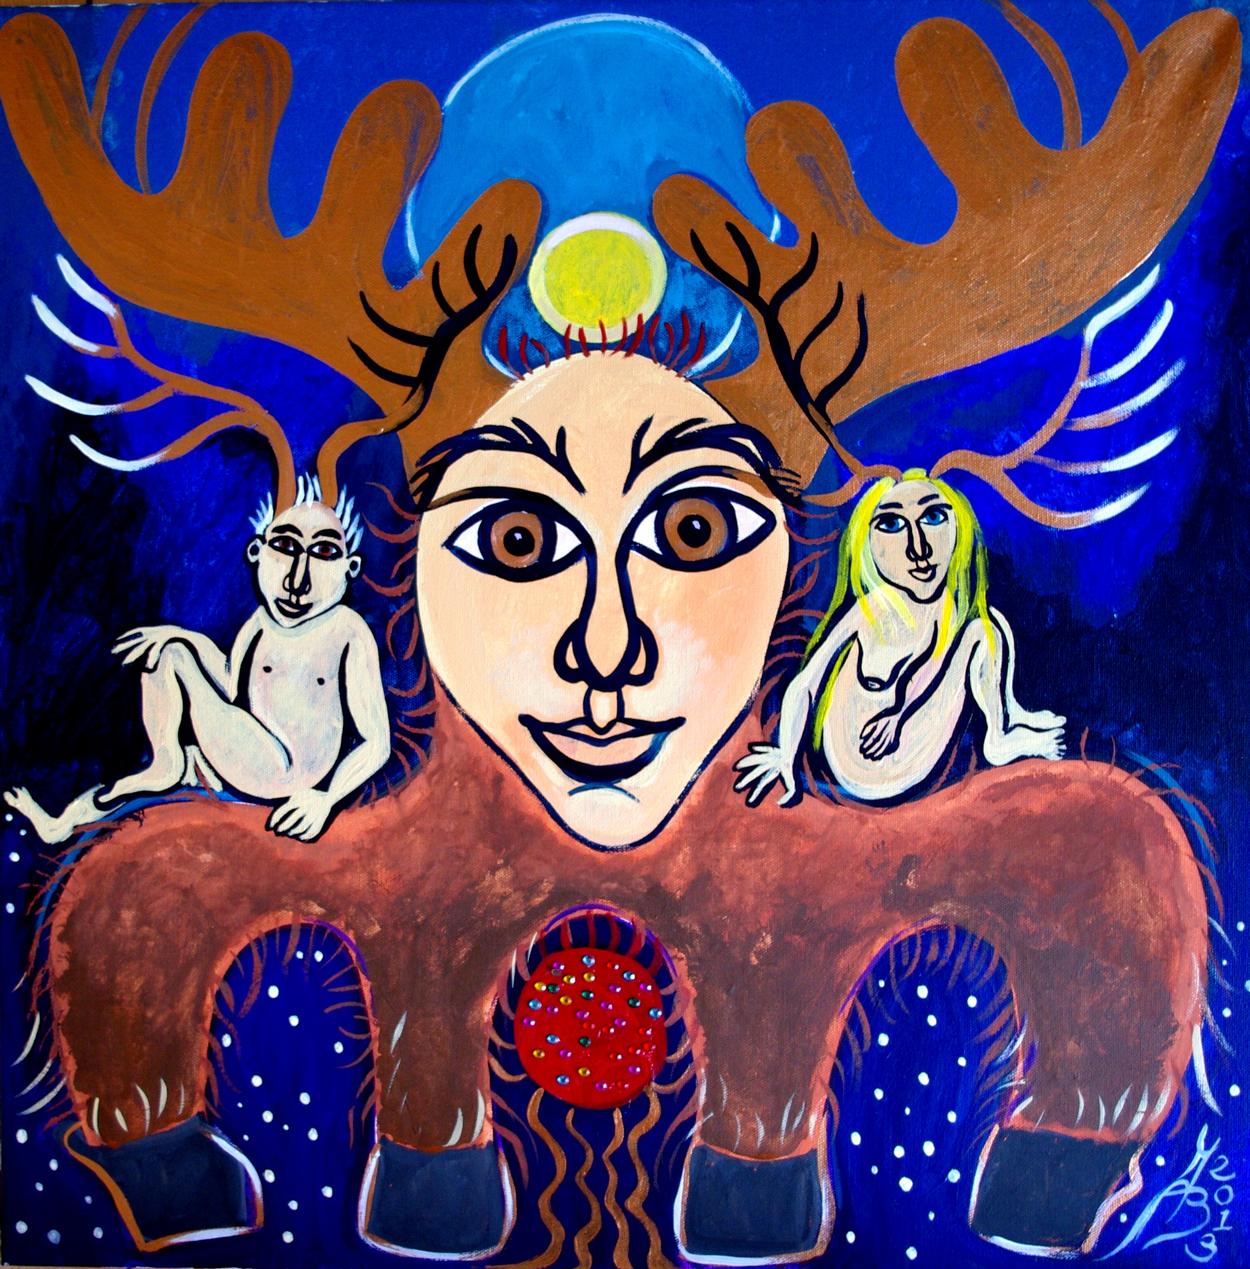 Shamanic teacher, painter and author in the UK and the world